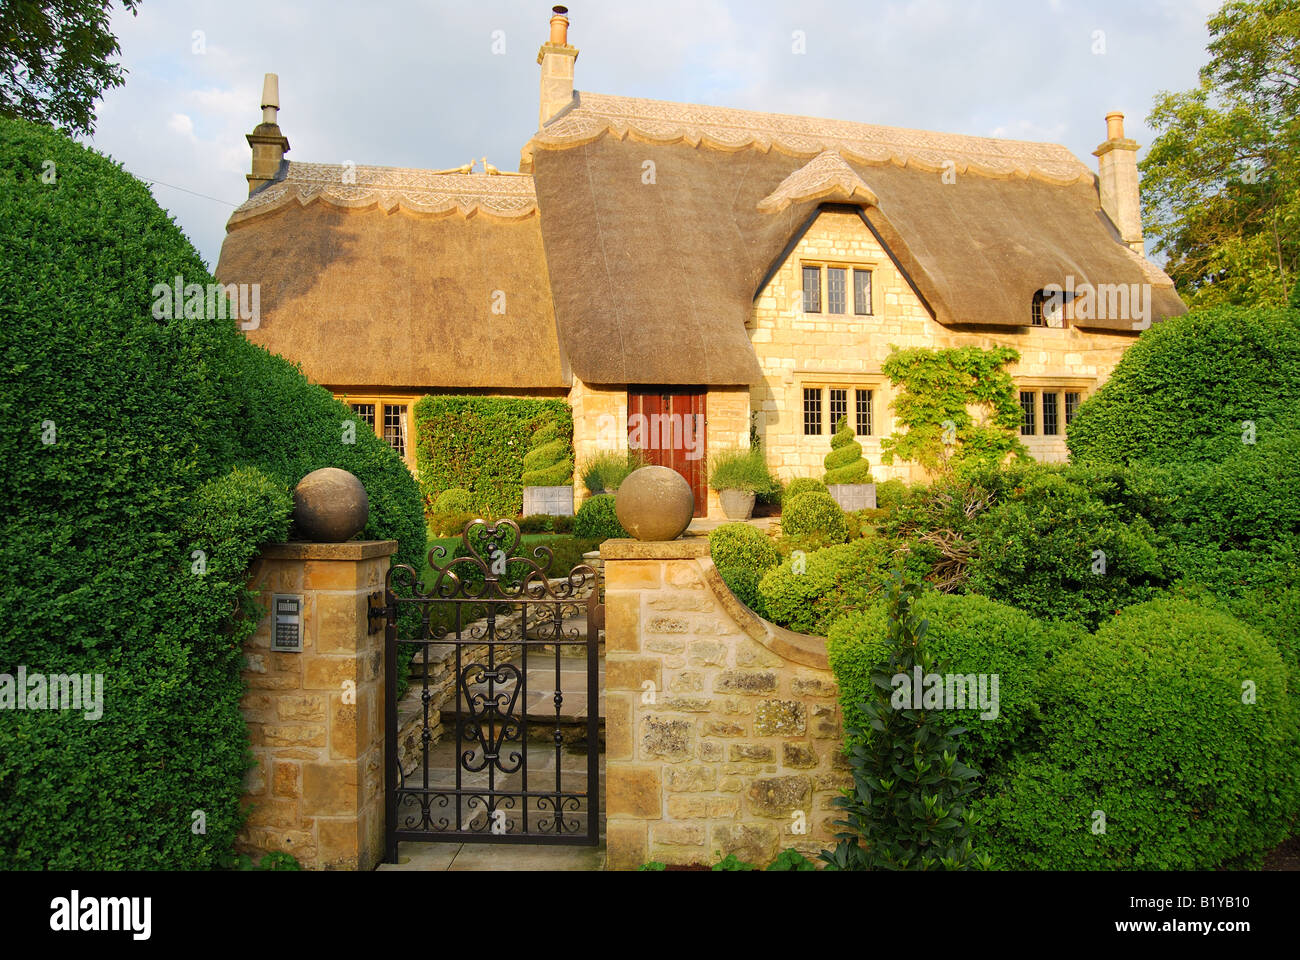 Thatched Cotswold cottage, Chipping Campden, Gloucestershire, England, United Kingdom Stock Photo